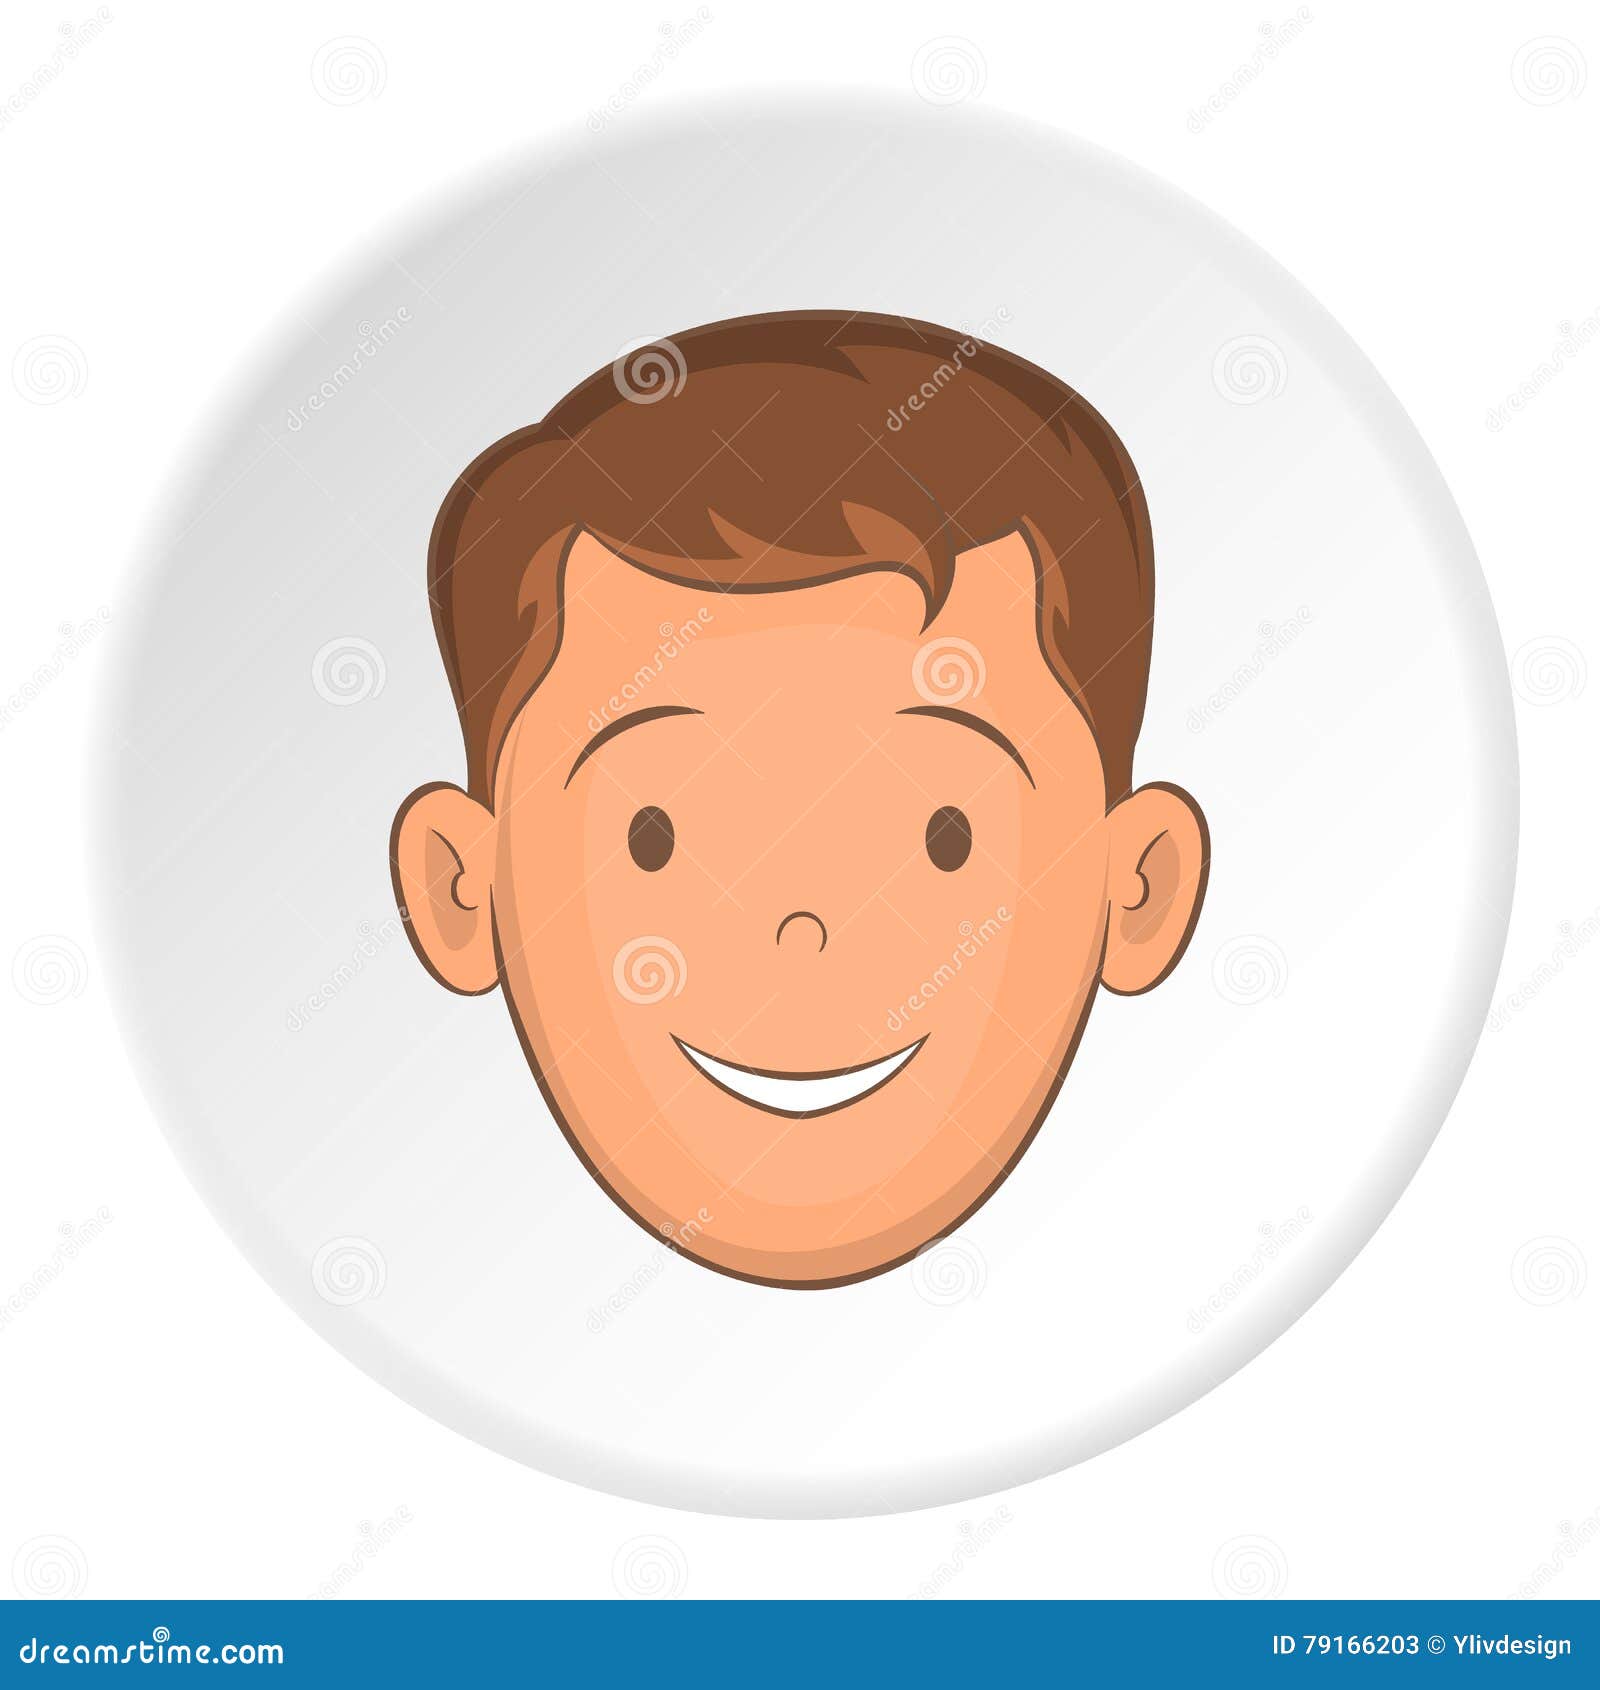 Male Face With Haircut Icon, Cartoon Style Stock Vector - Illustration